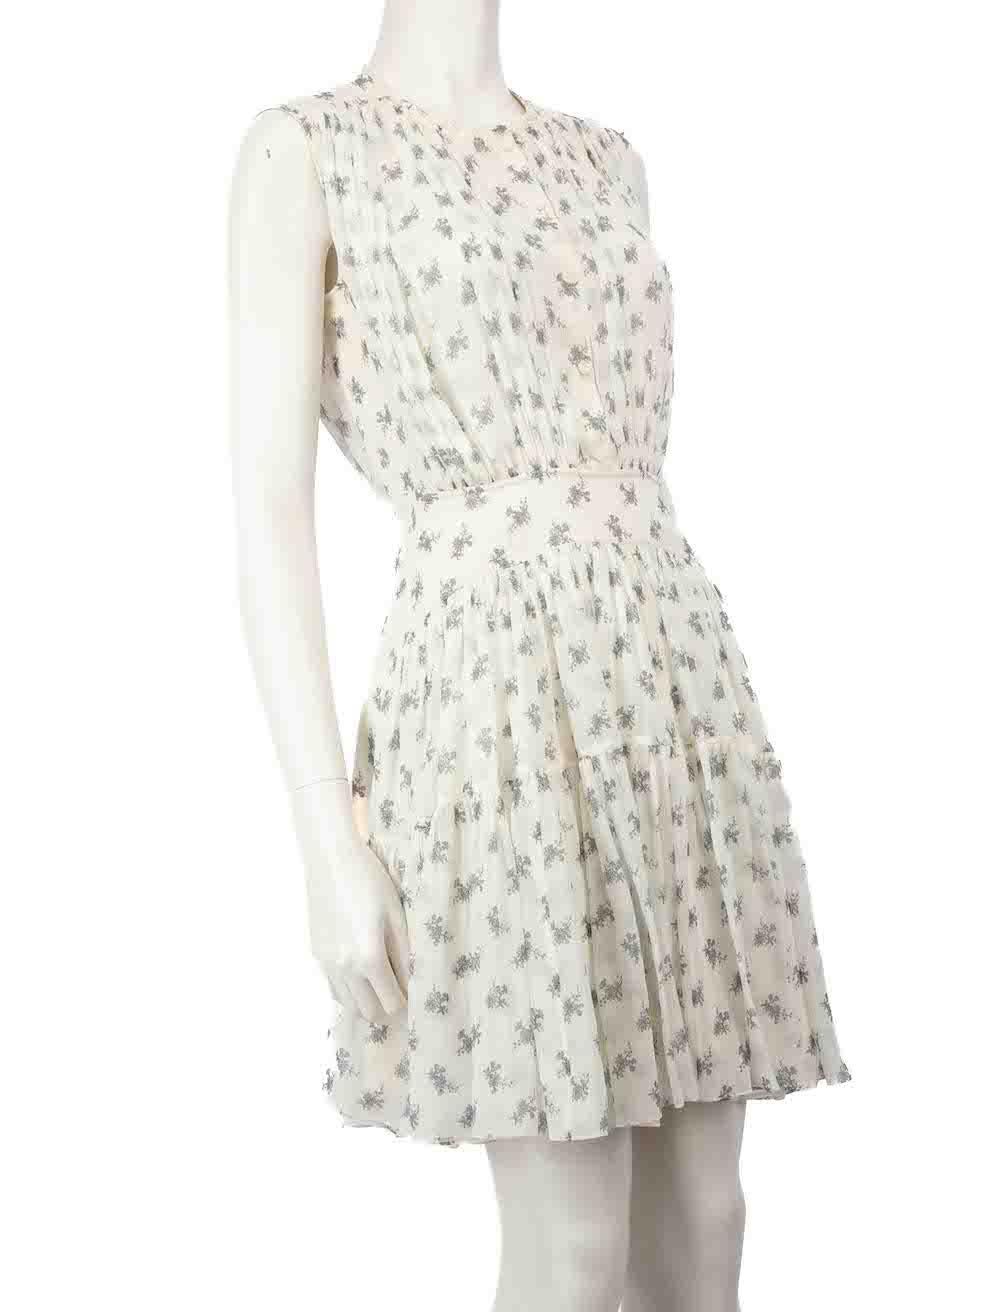 CONDITION is Very good. Minimal wear to dress is evident. Minimal wear to the front near the button is seen with a discolouration mark on this used Chloé designer resale item.
 
 
 
 Details
 
 
 White
 
 Silk
 
 Dress
 
 Grey floral print
 
